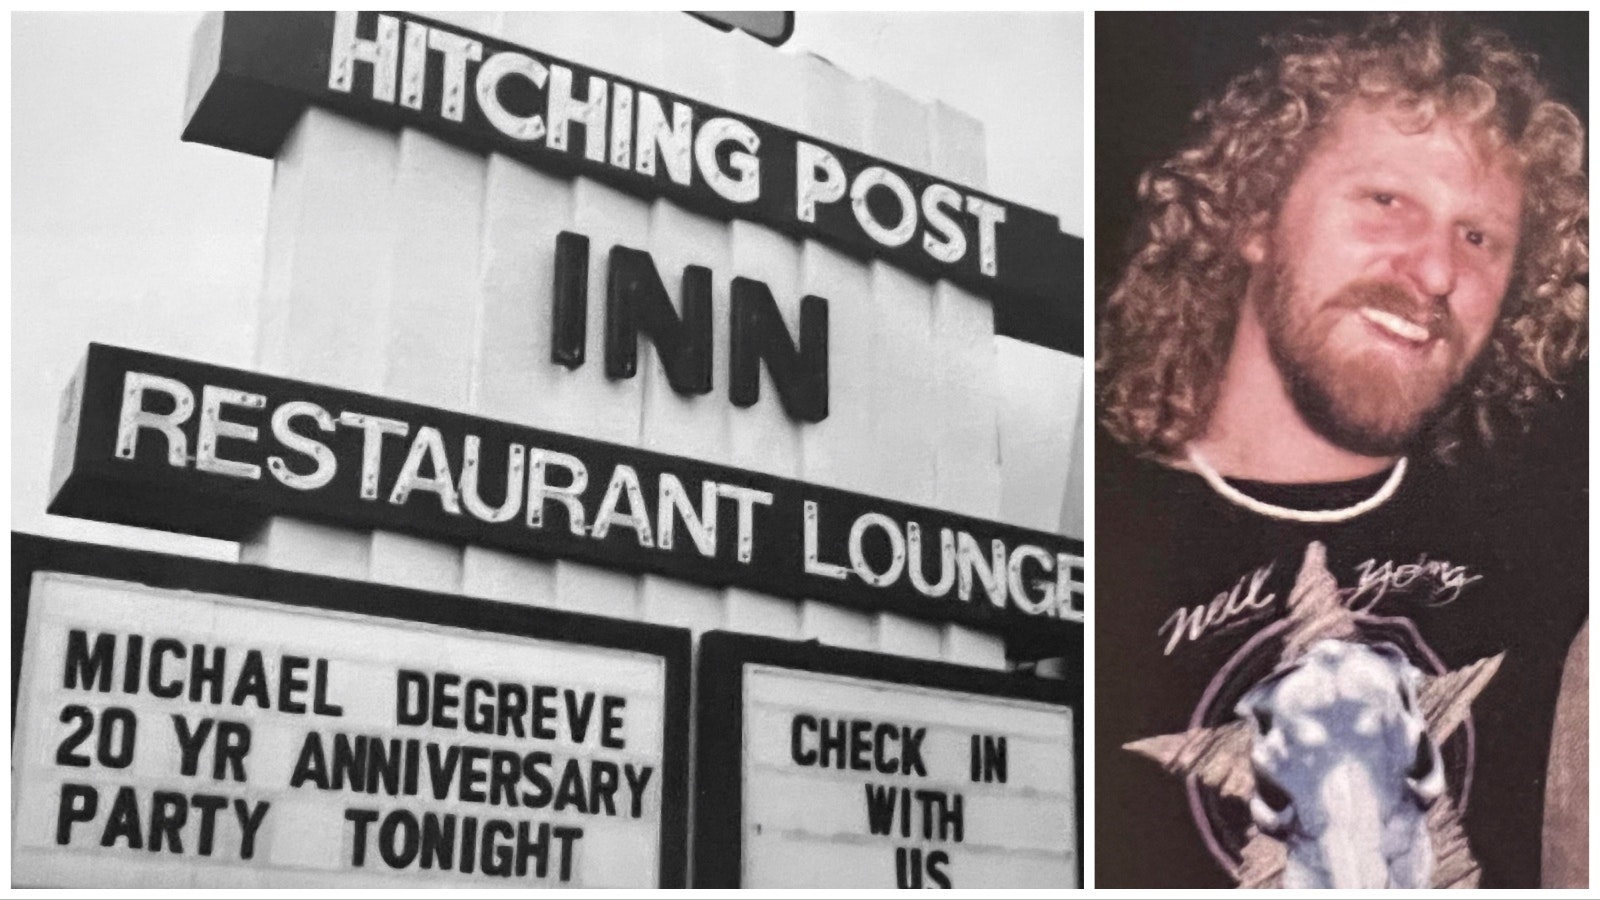 Folk rocker Michael DeGreve was a fixture for years at the Hitching Post Inn in Cheyenne.